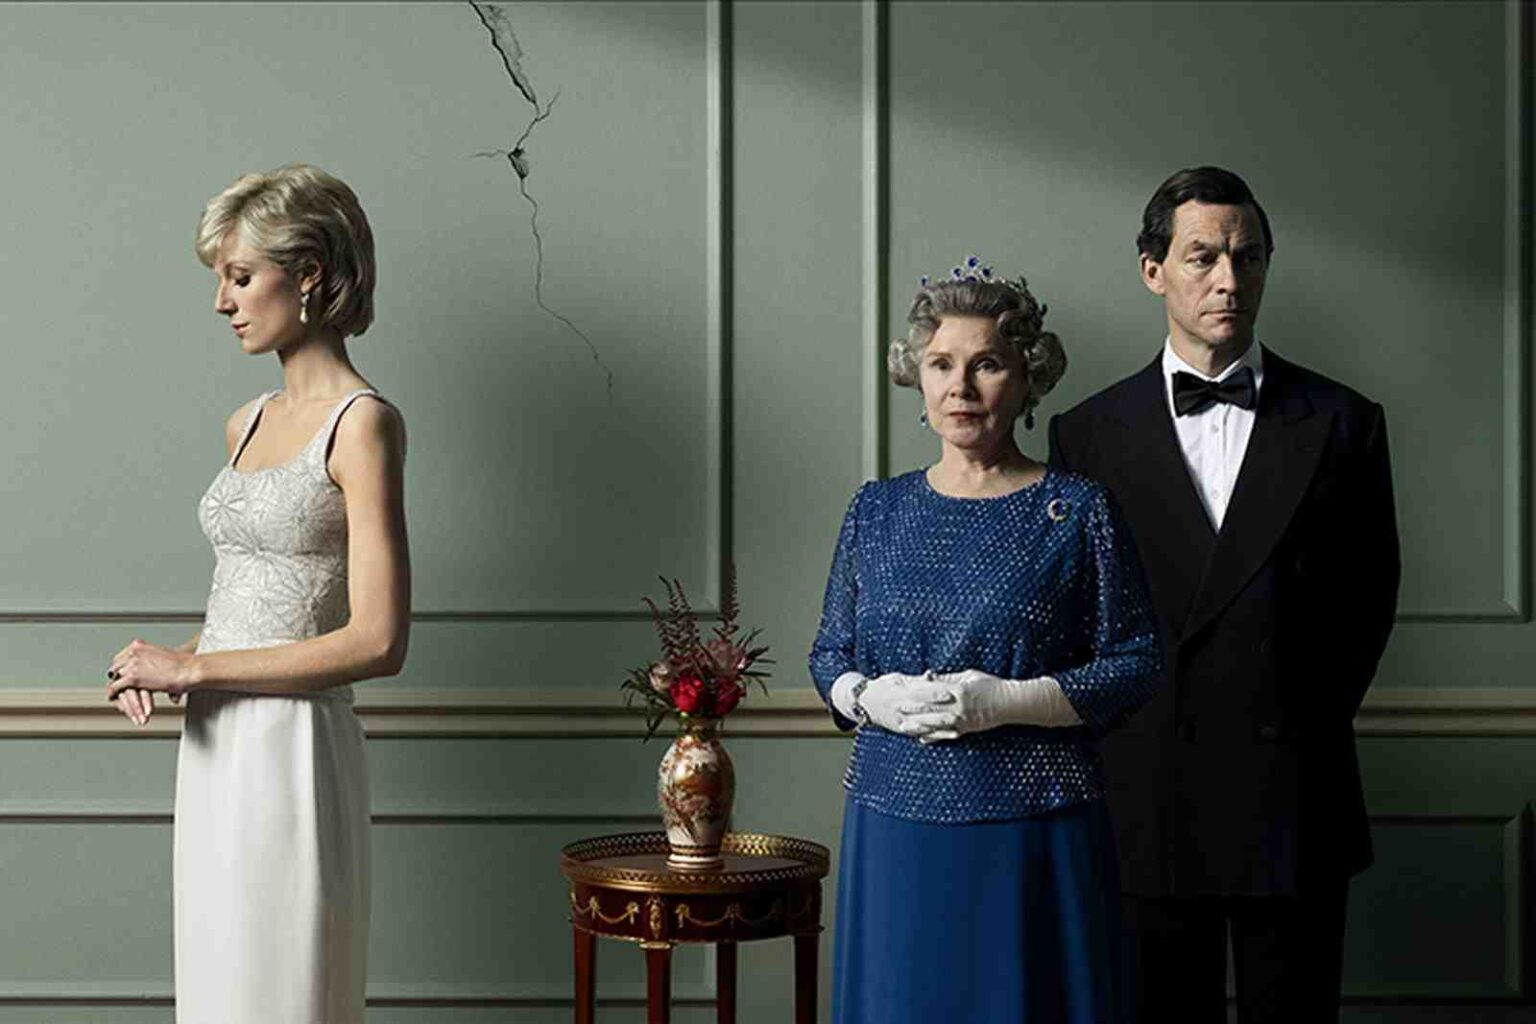 "Final tiaras or looming scepters? 'The Crown' season 5 may bid farewell or whet our appetite for more royal drama. Decipher the whispers and leaks with us!"